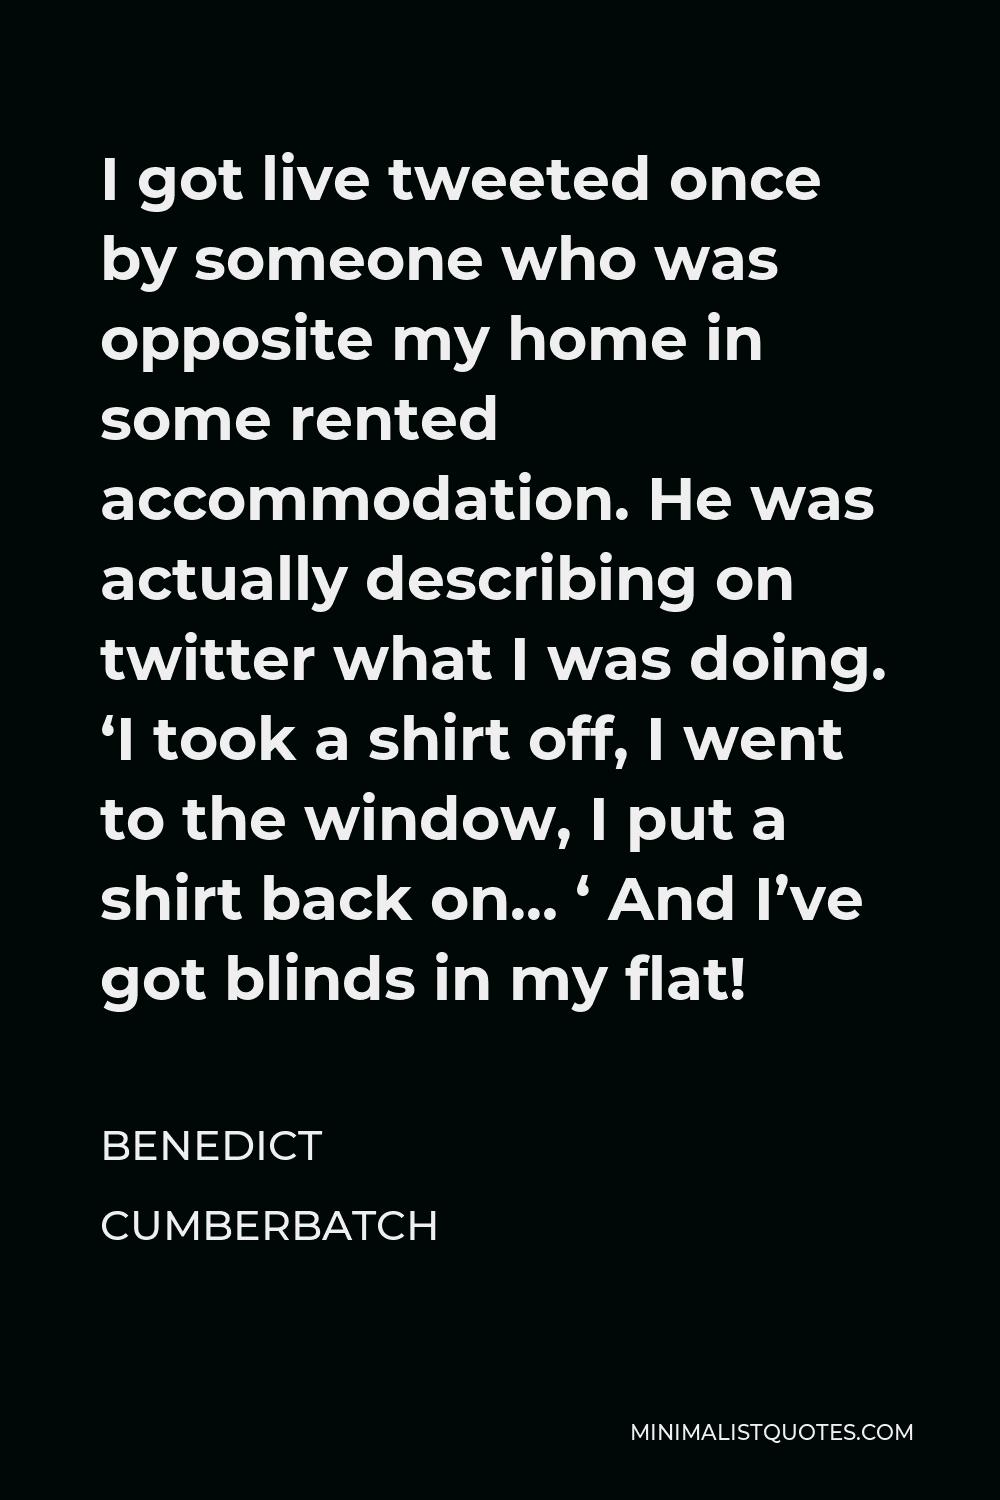 Benedict Cumberbatch Quote - I got live tweeted once by someone who was opposite my home in some rented accommodation. He was actually describing on twitter what I was doing. ‘I took a shirt off, I went to the window, I put a shirt back on… ‘ And I’ve got blinds in my flat!